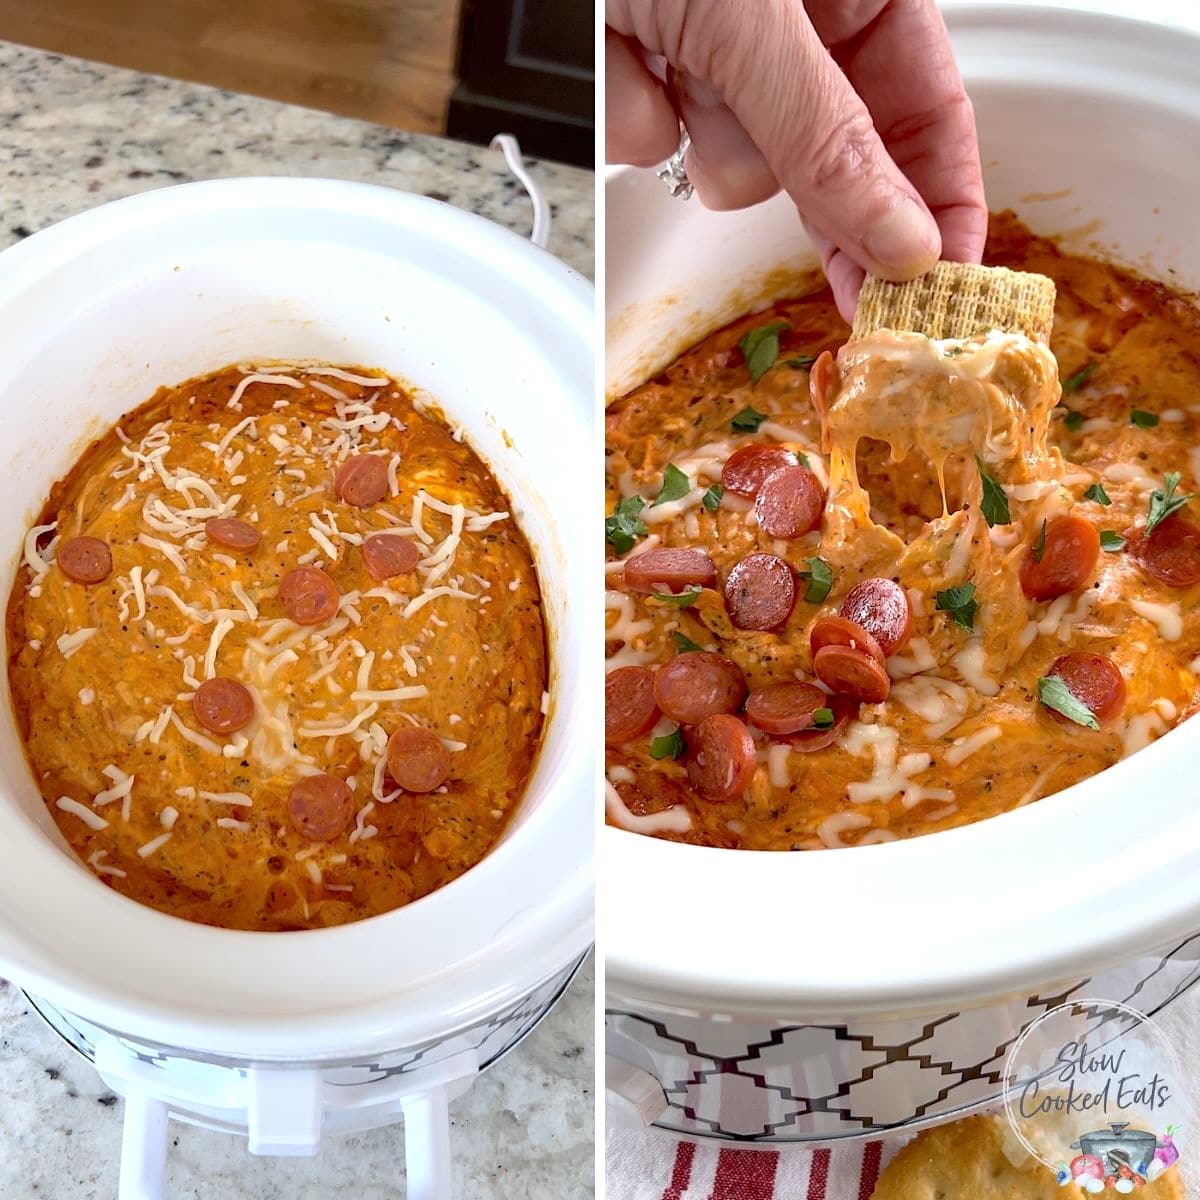 Serving the crockpot pizza dip with crackers right out of the slow cooker.